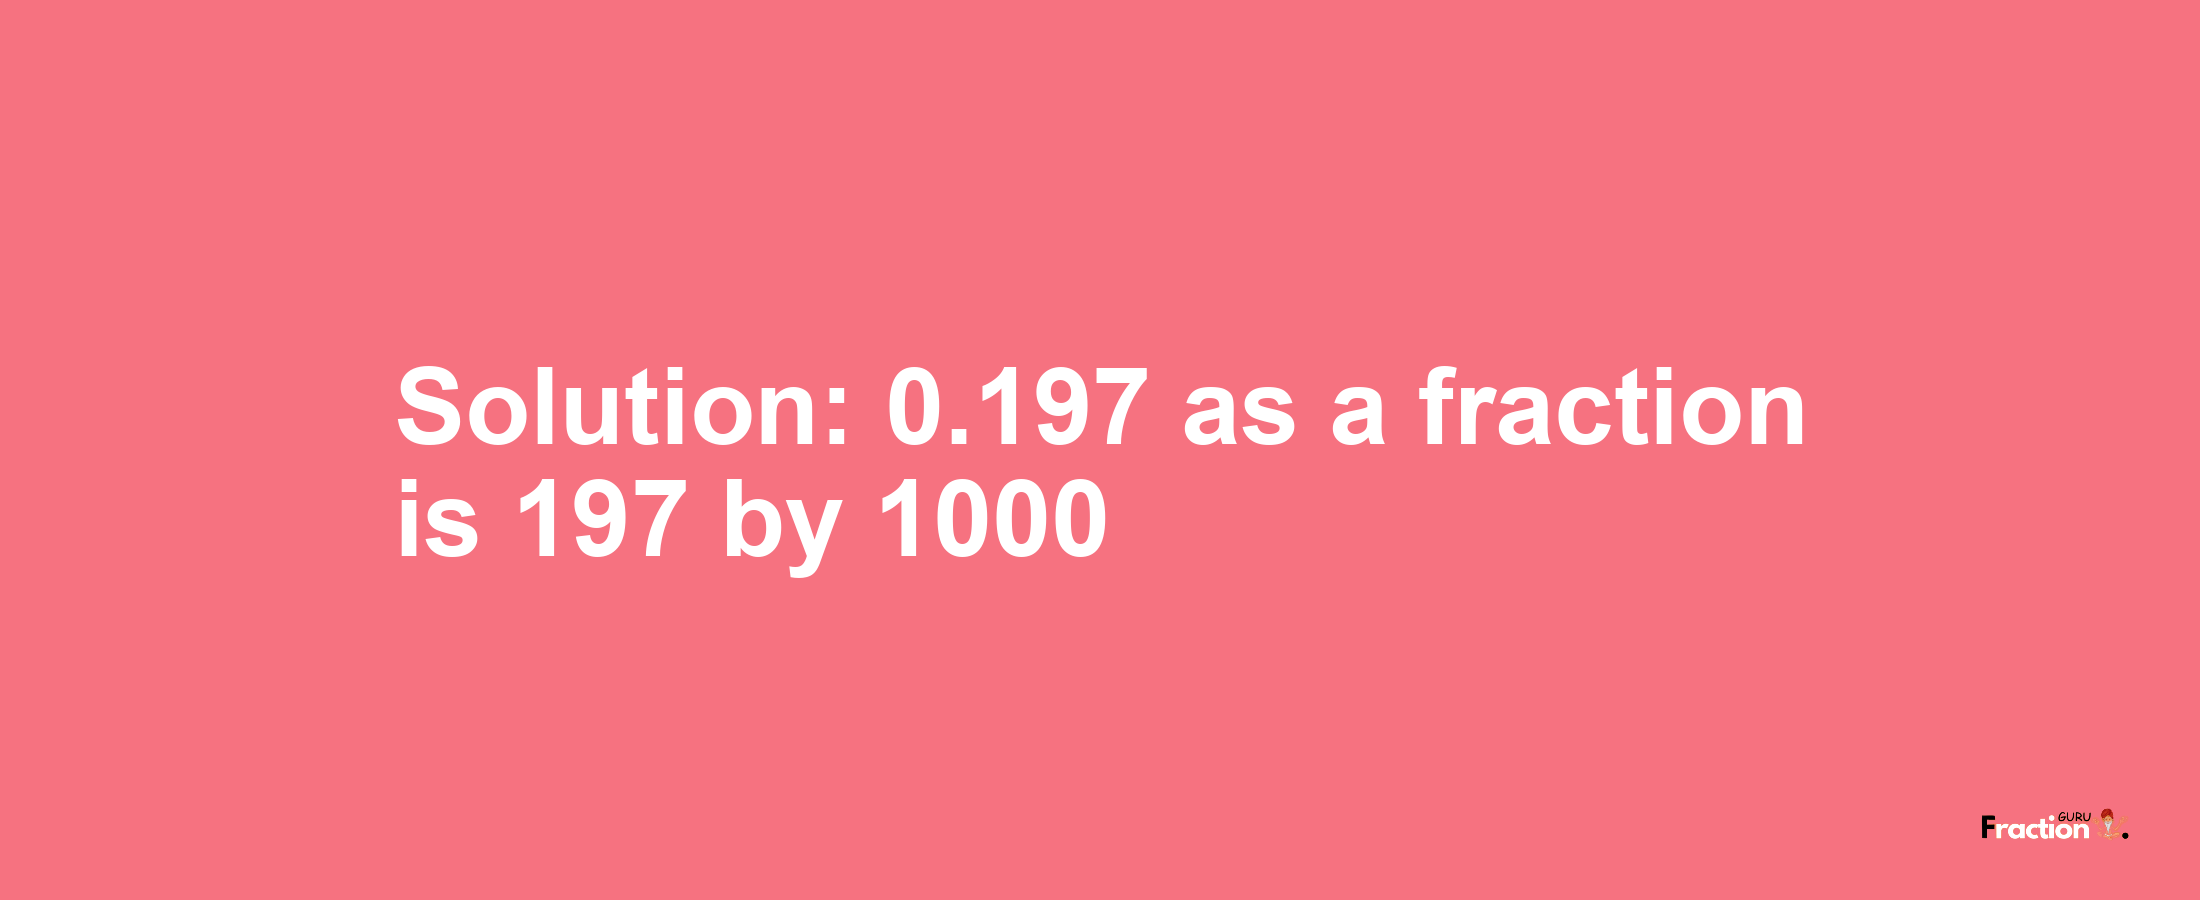 Solution:0.197 as a fraction is 197/1000